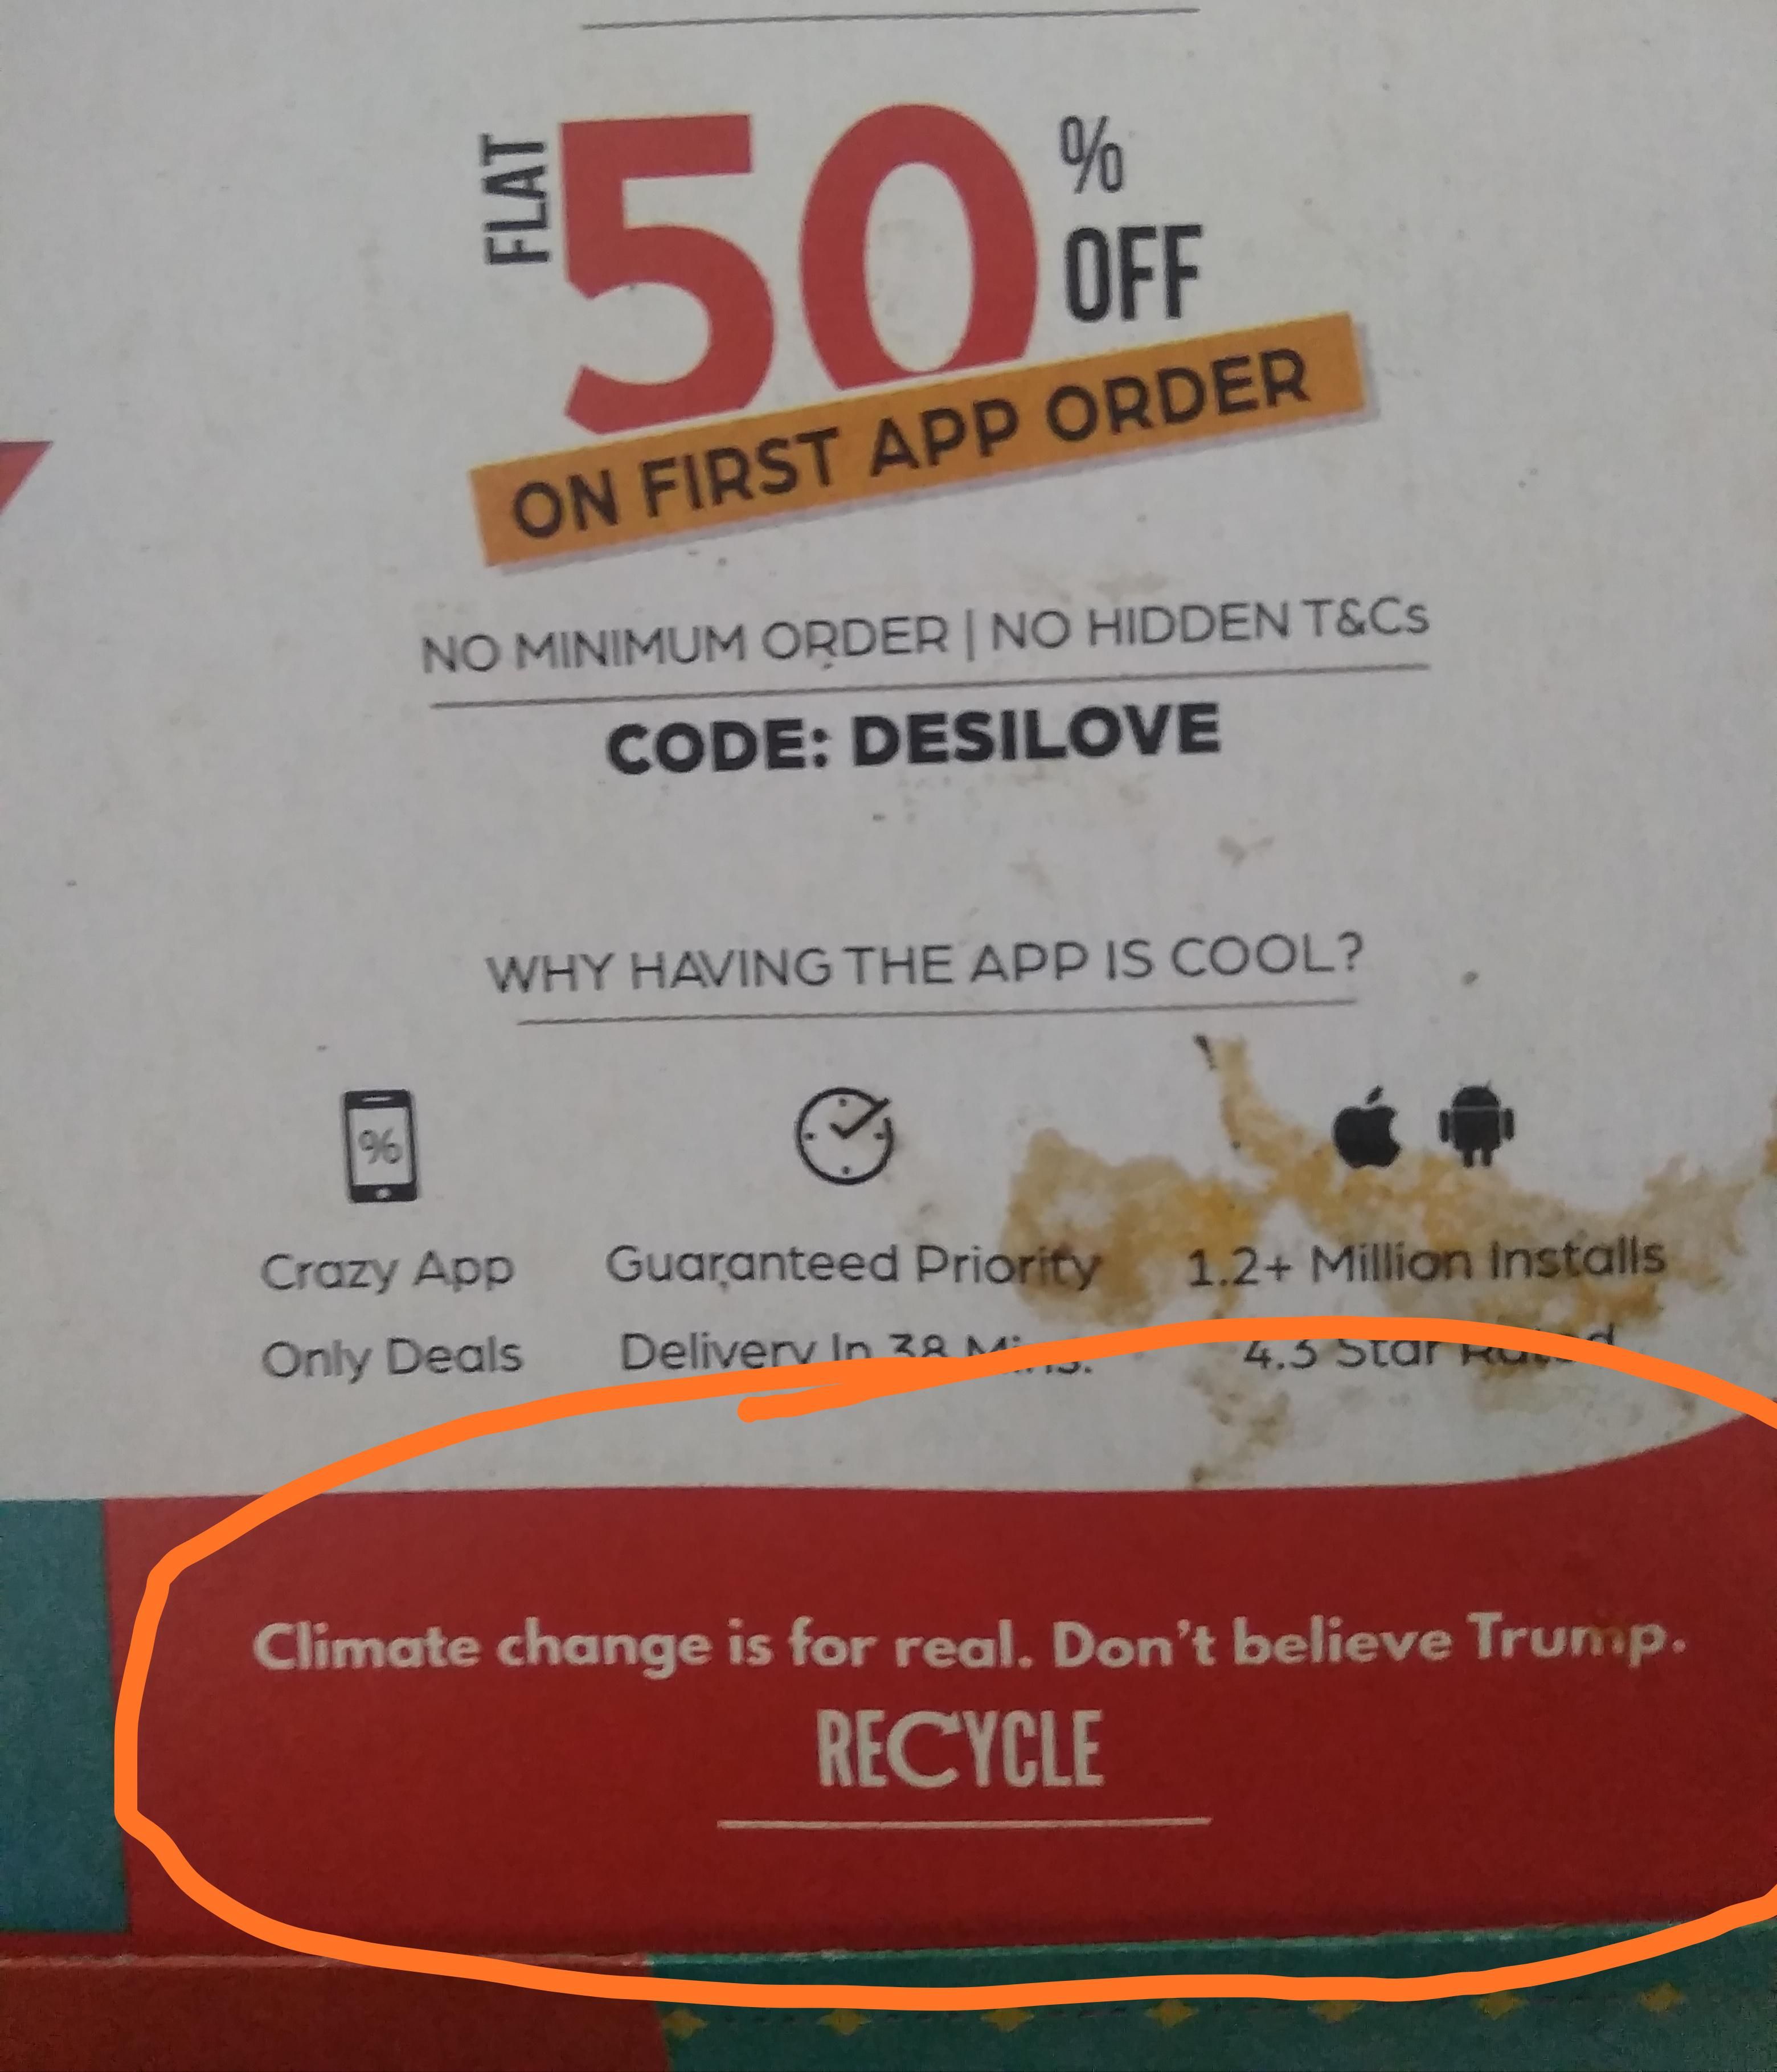 This tip on my pizza box in India